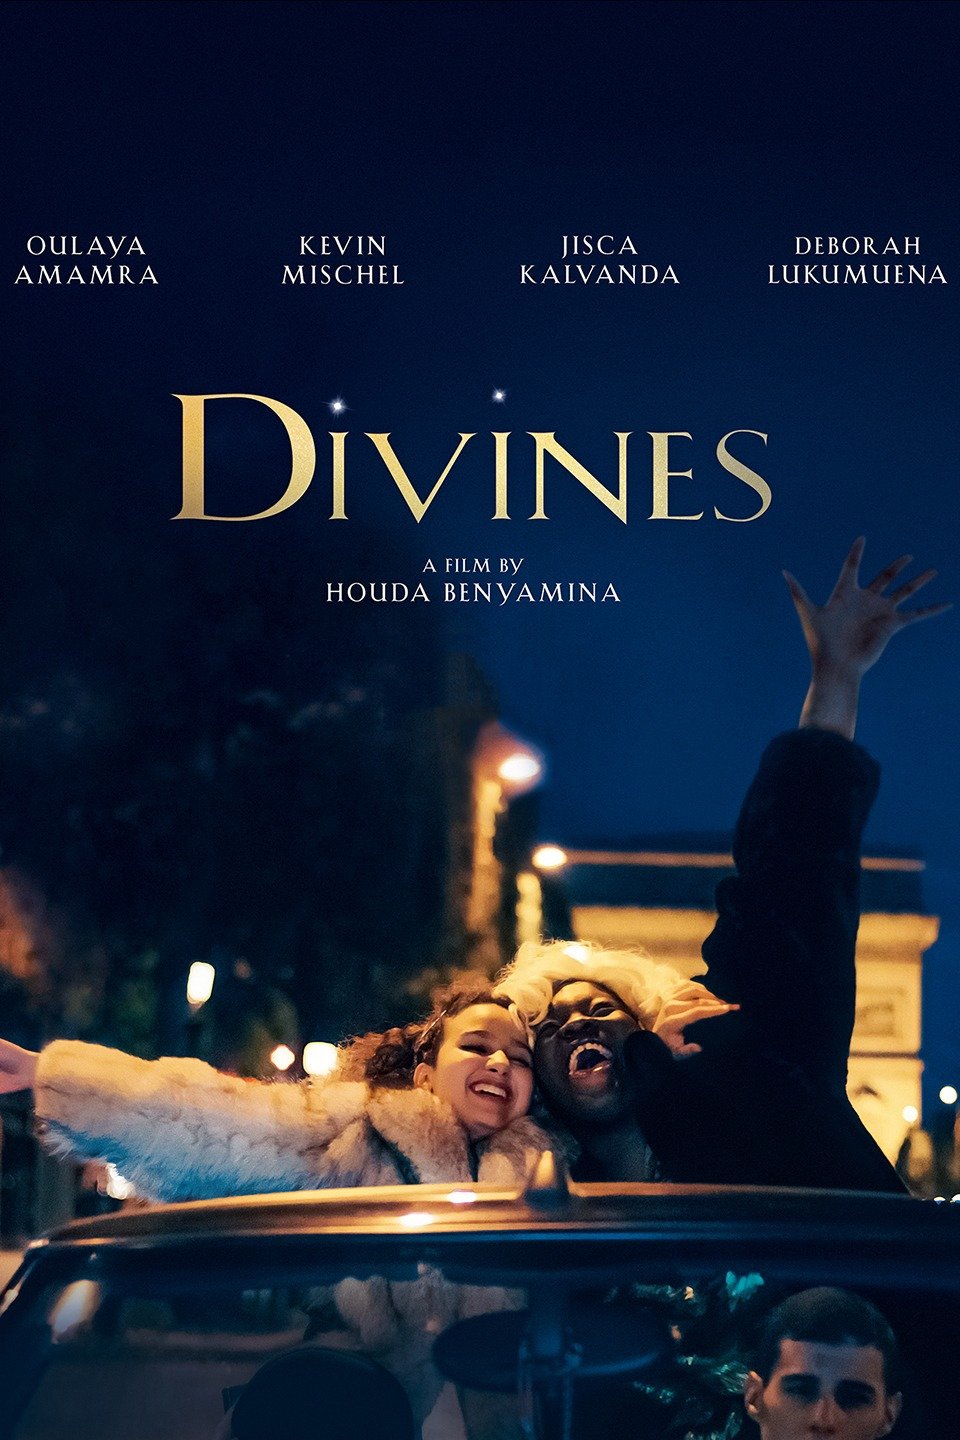 Movie poster for Divines